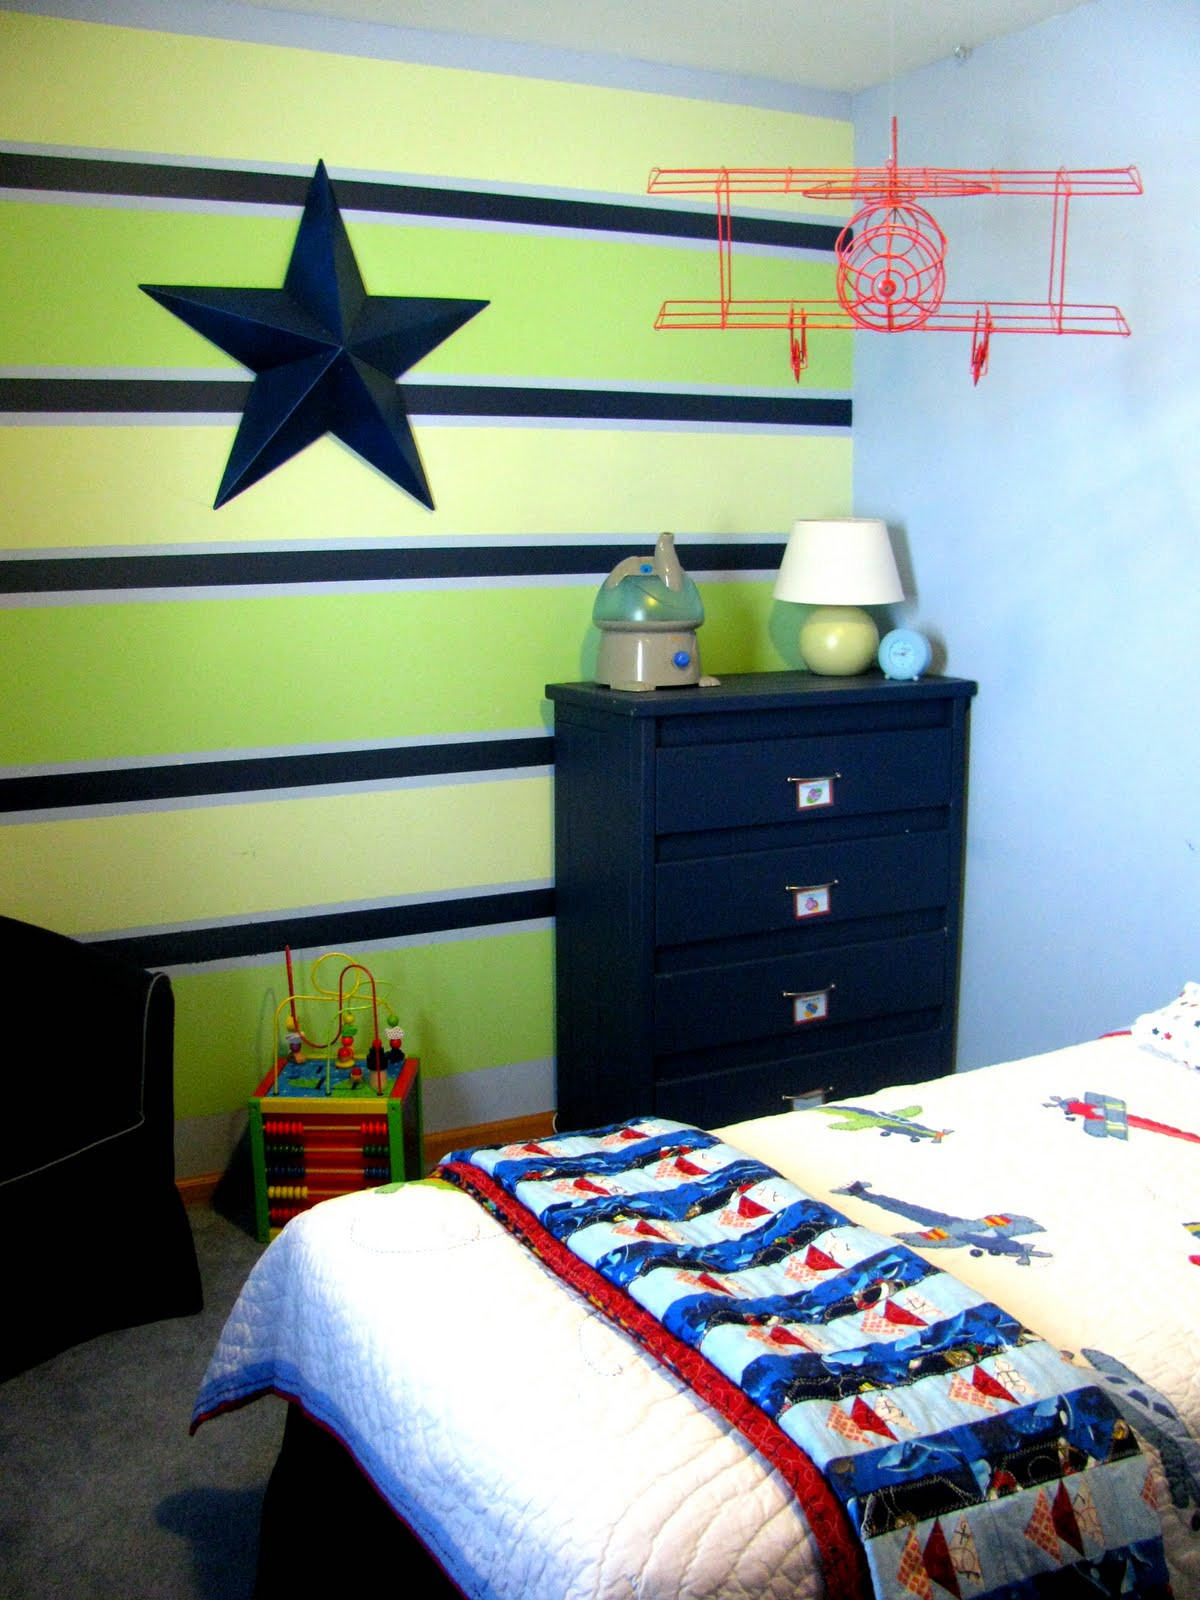 Kids Room Paint Design
 Kids Rooms Ideas of How to Do Some Creative Painting